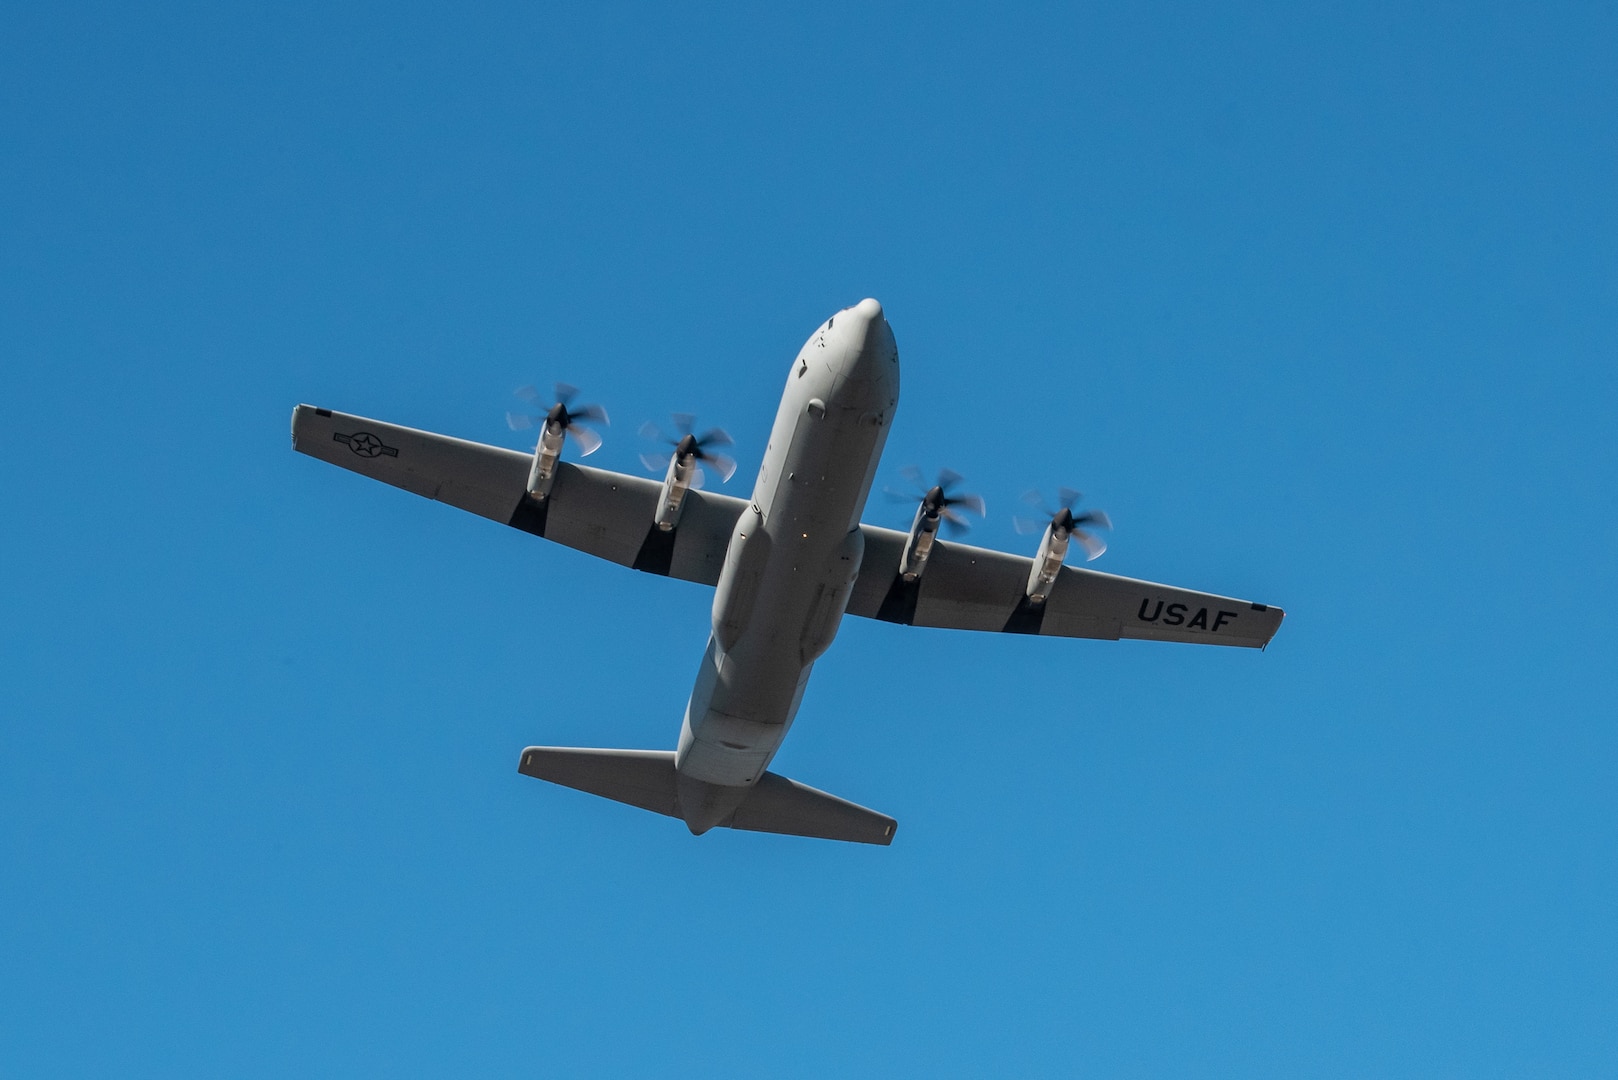 One of two new C-130J Super Hercules aircraft arrives at the Kentucky Air National Guard Base in Louisville, Ky., Nov. 6, 2021.